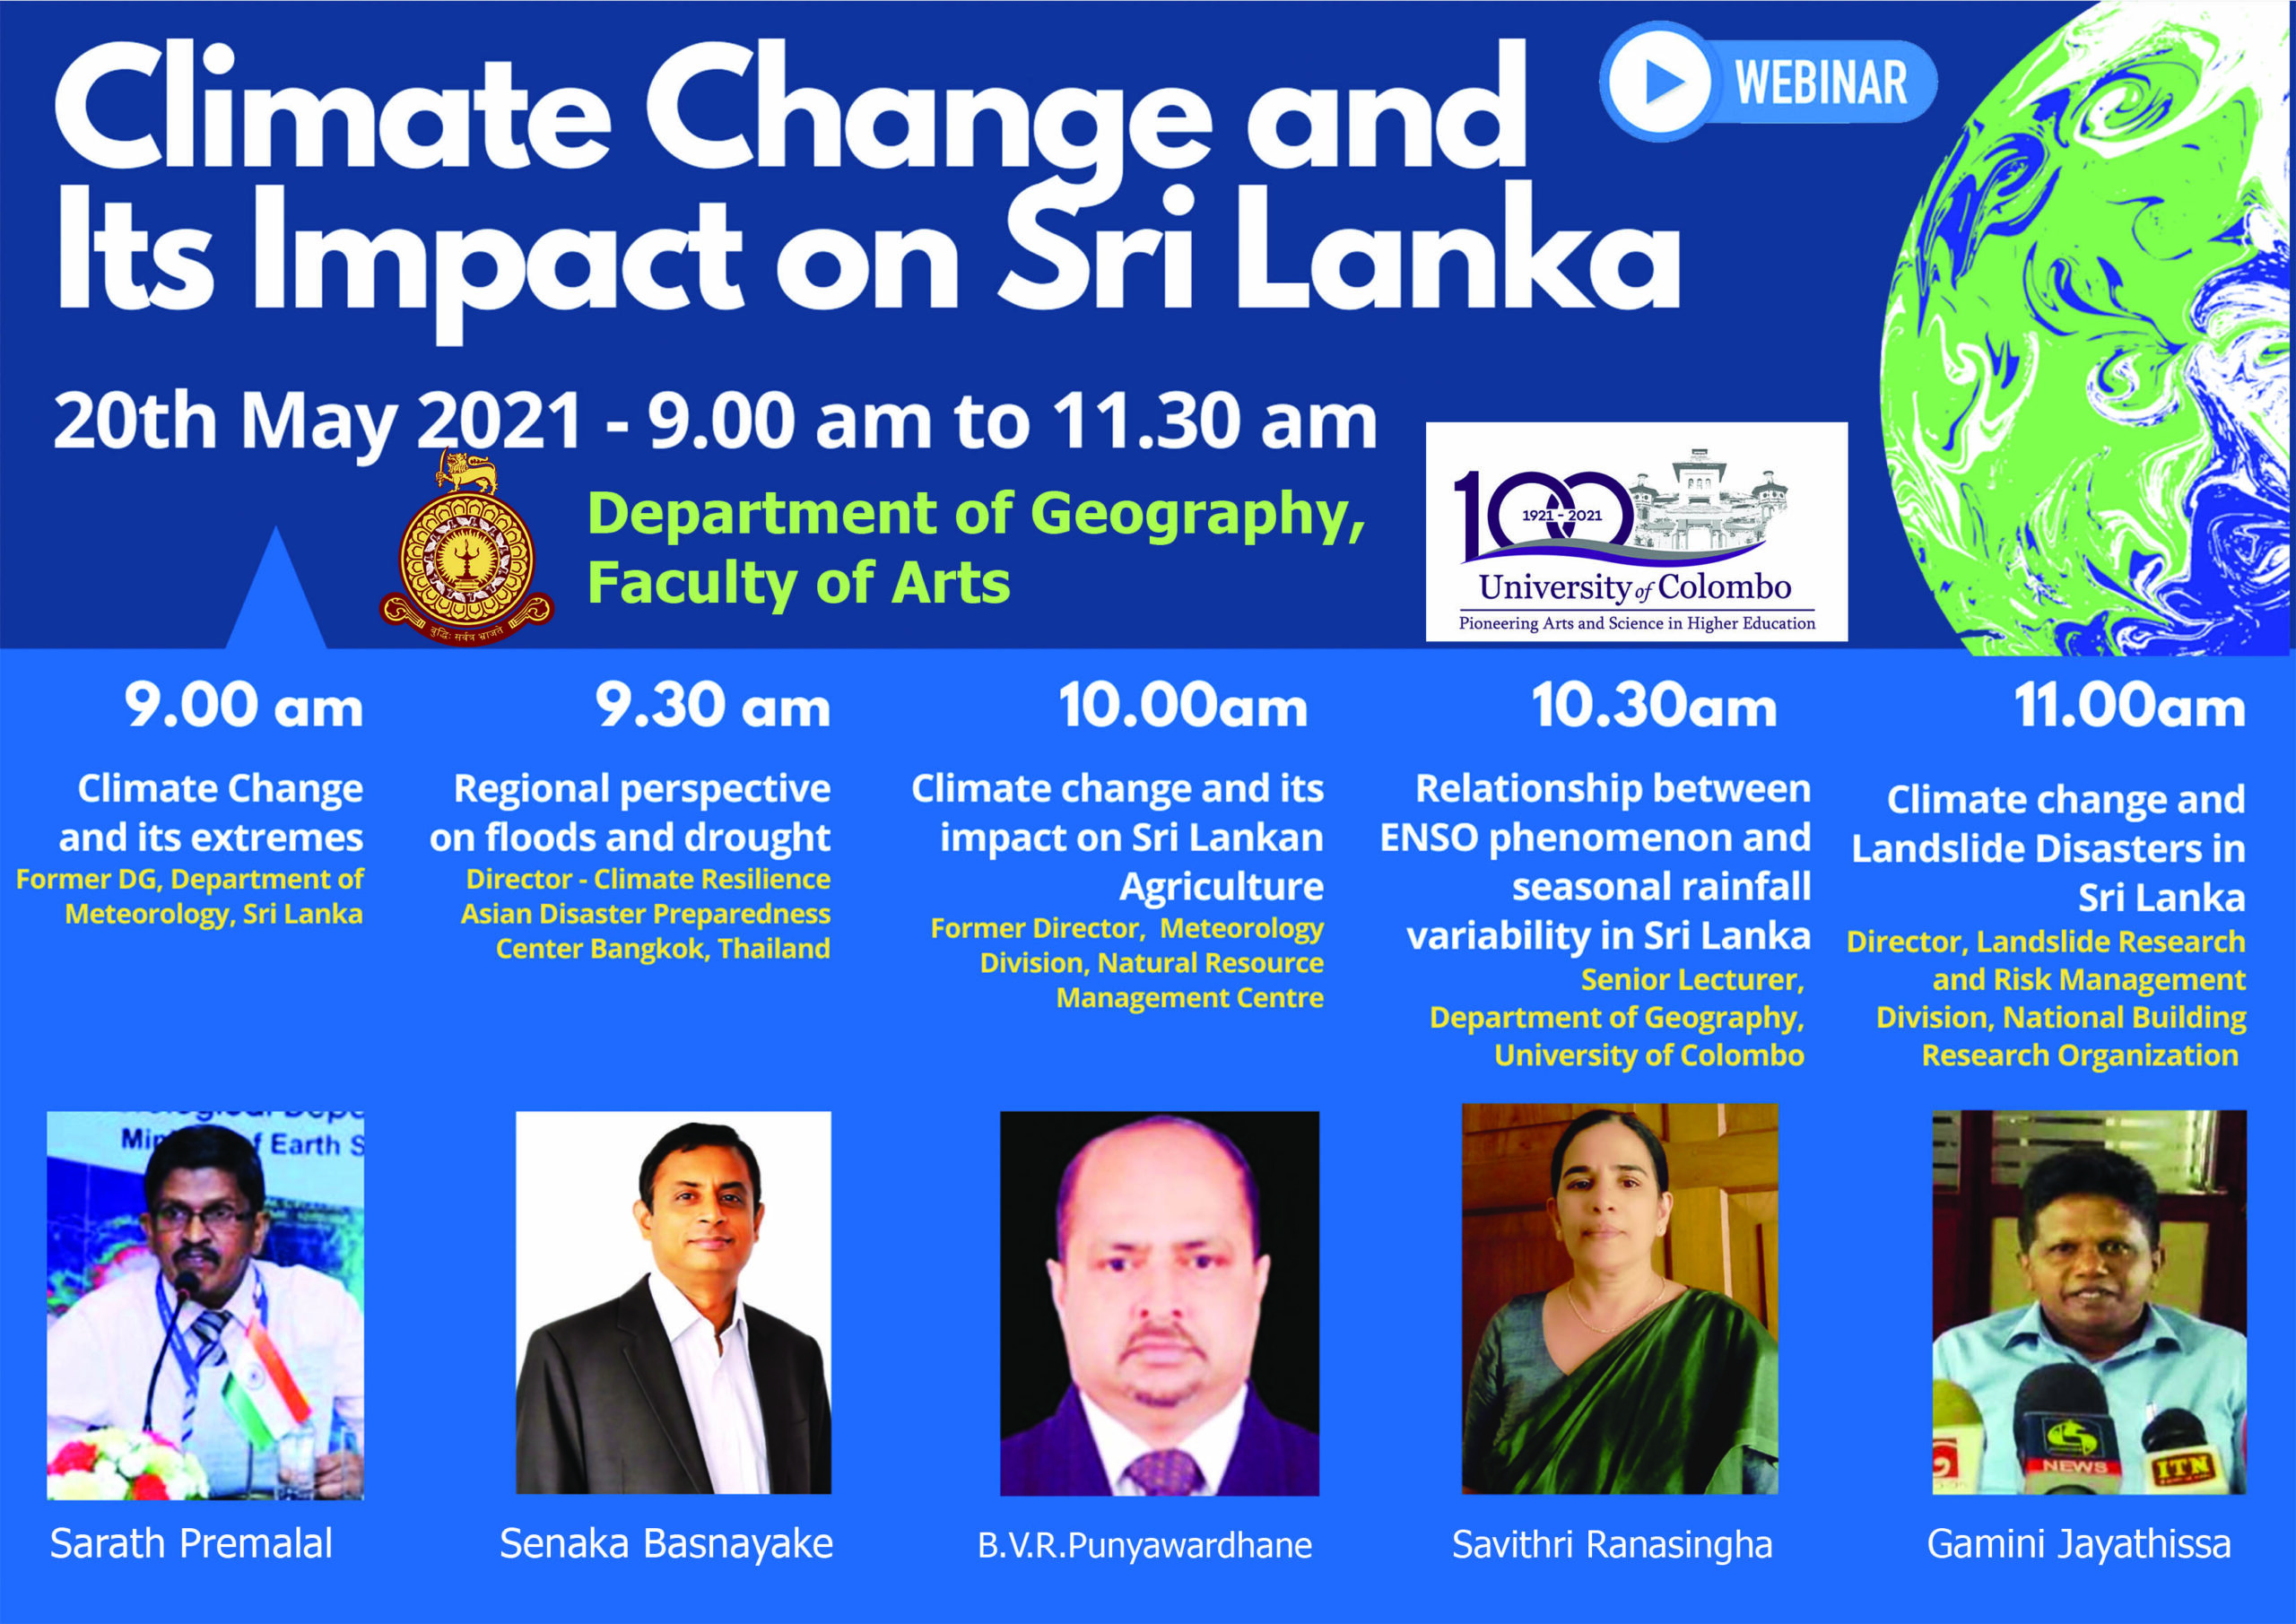 Webinar on Climate Change and its impact on Sri Lanka – 20th May